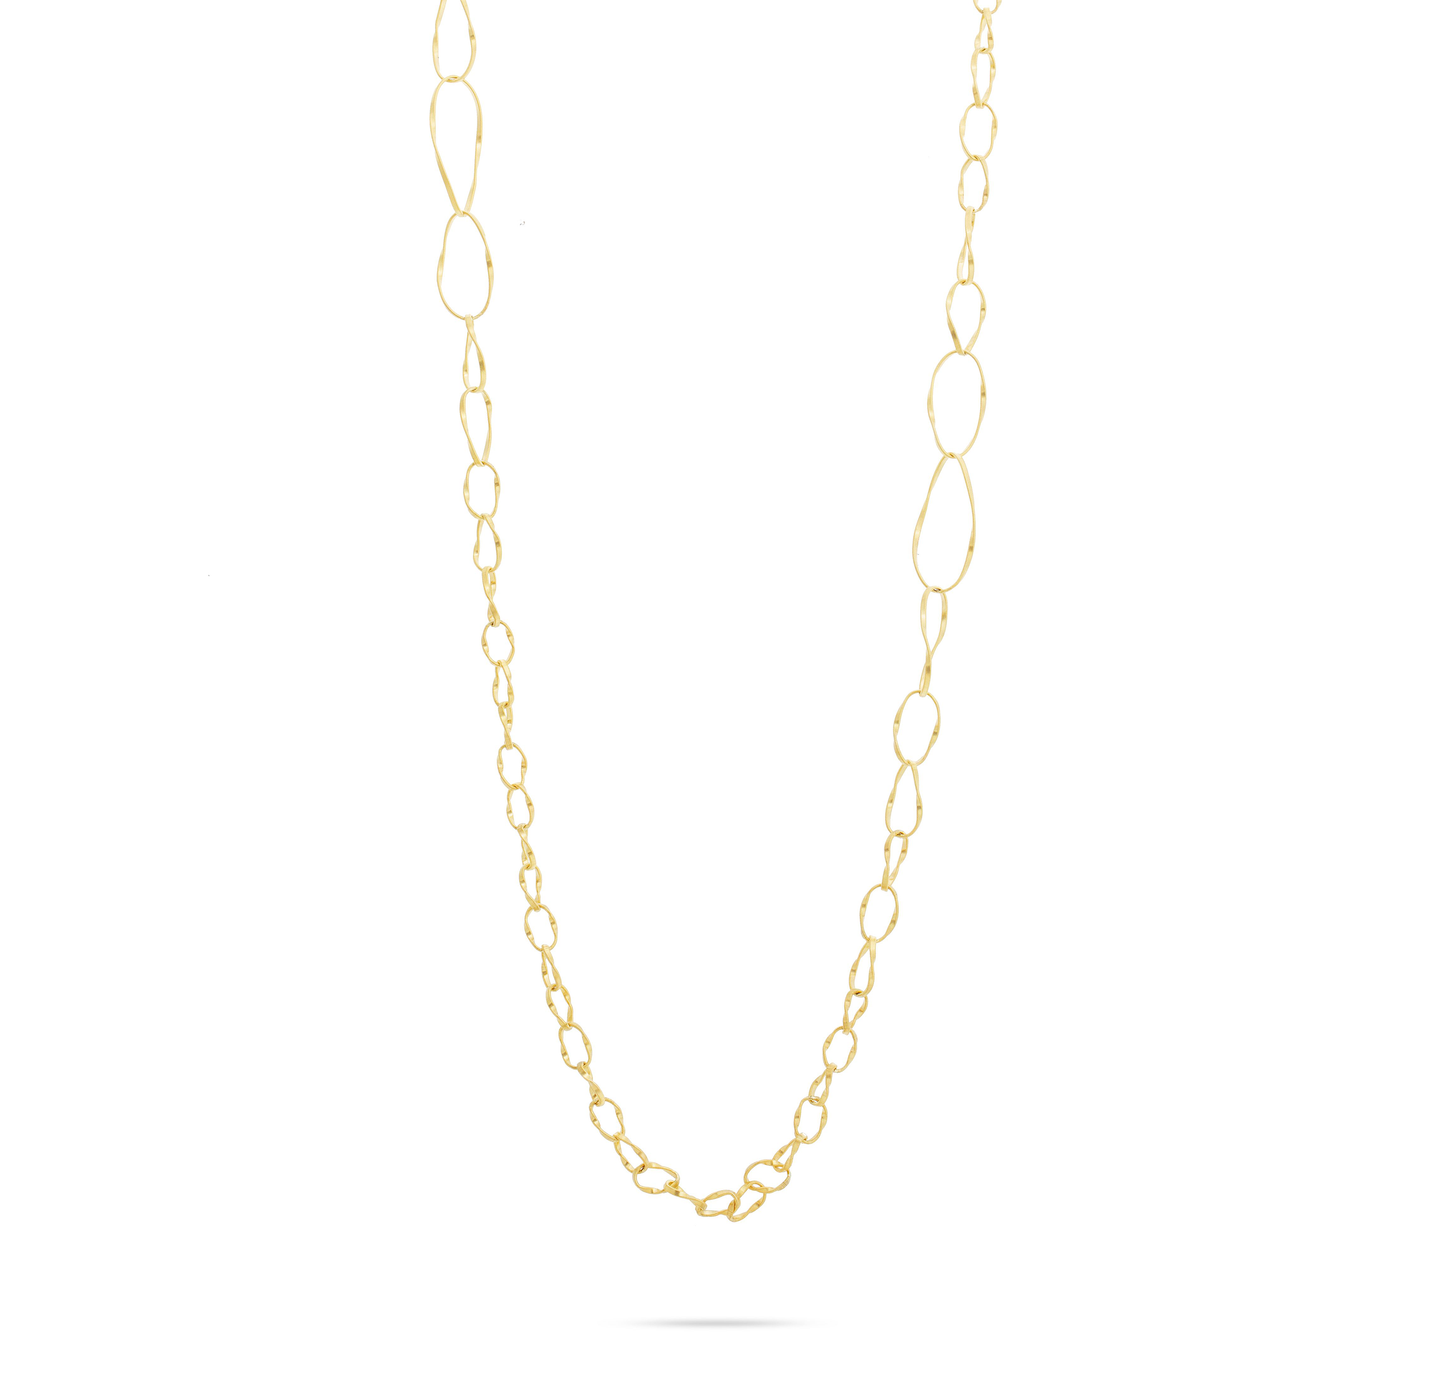 Marco Bicego Marrakech Yellow Gold Long Chain Necklace